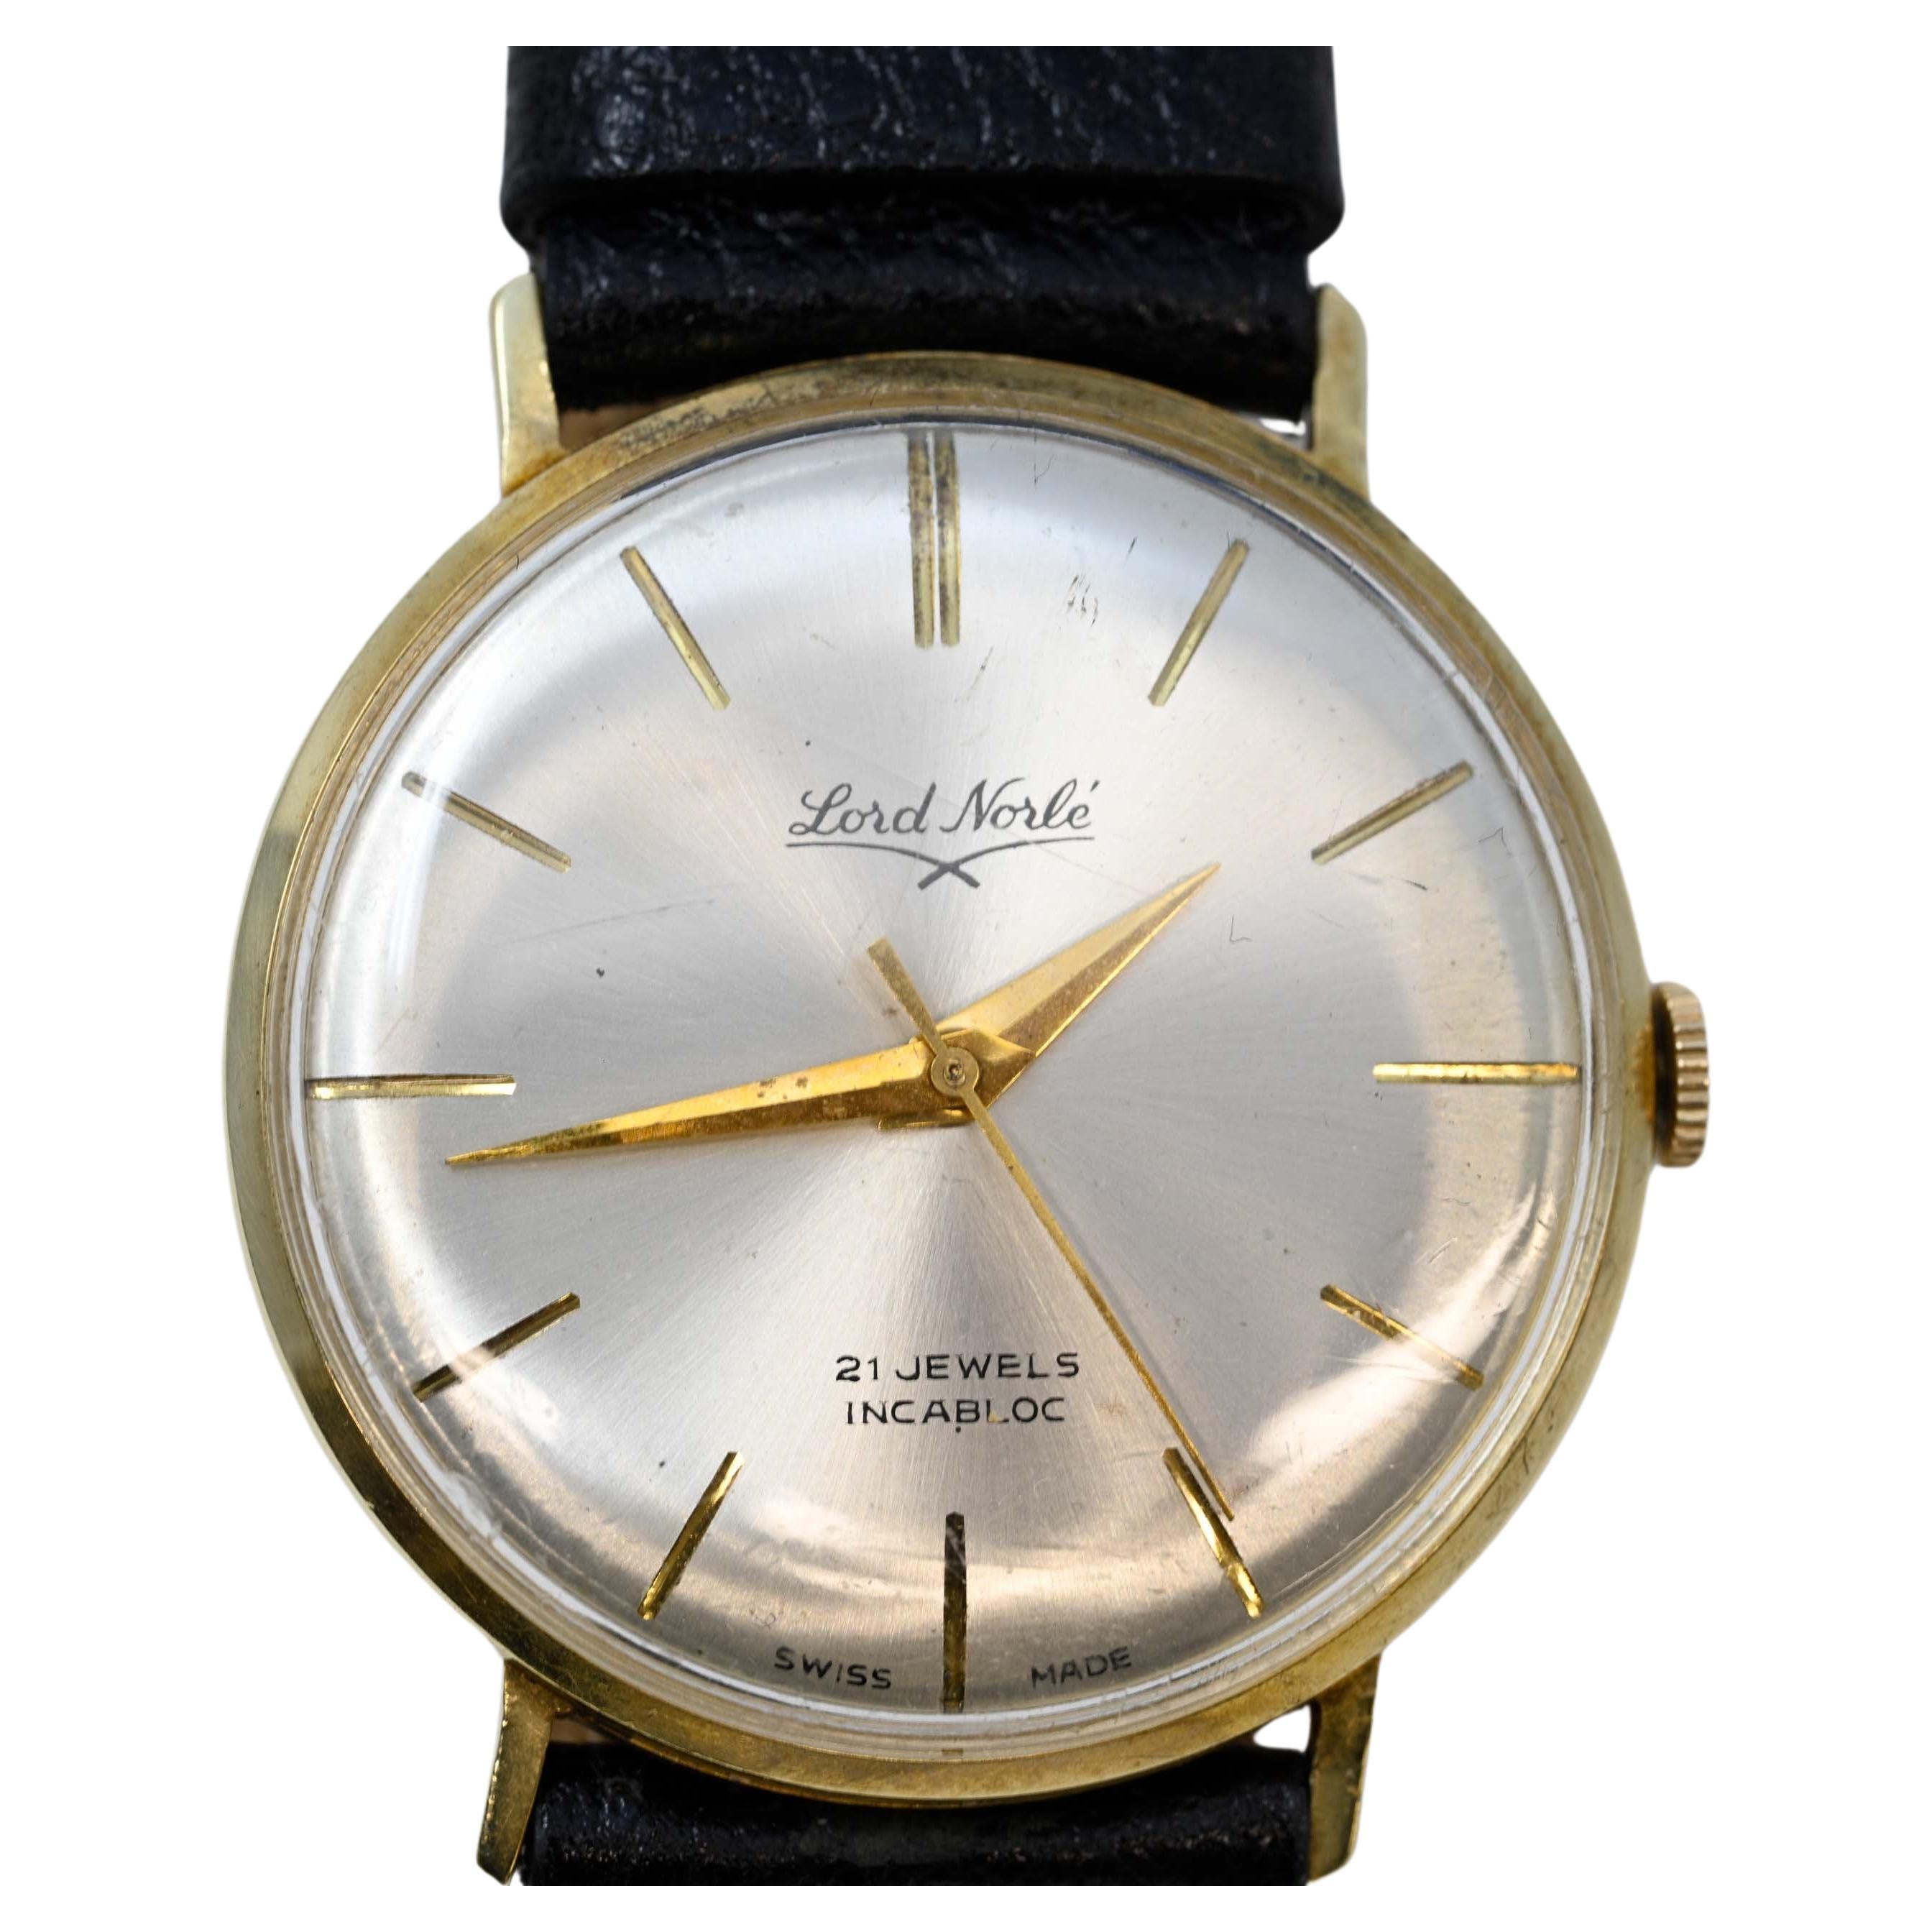 Lord Norle 14k Gold Men's Watch Mechanical Movement For Sale